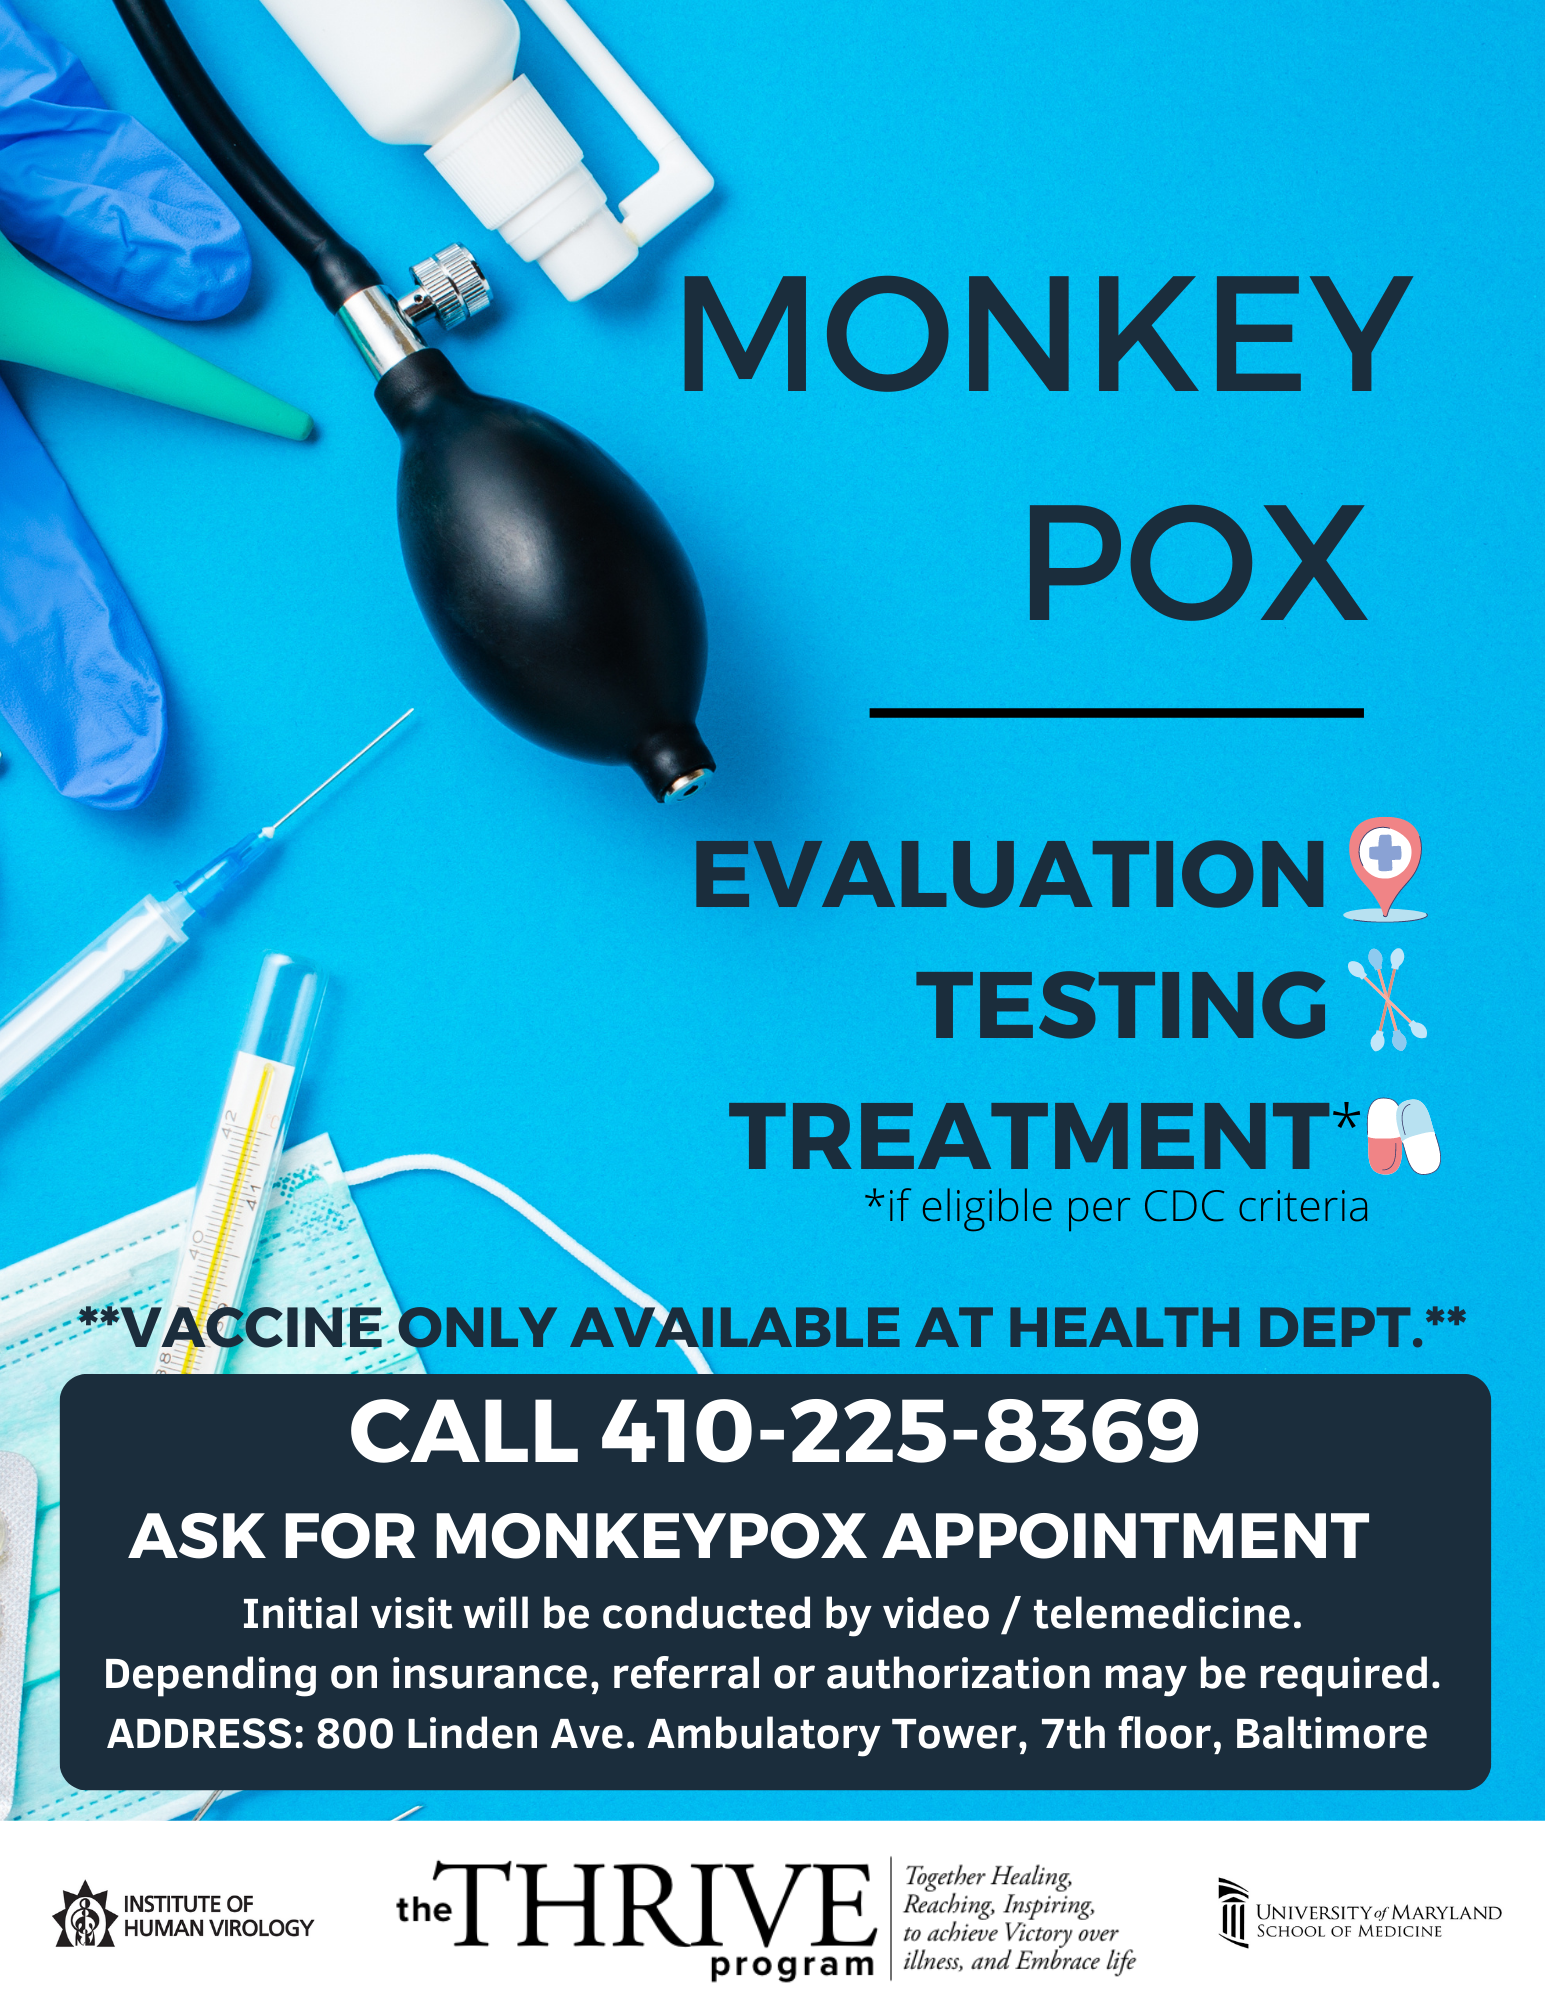 Ad for how to get an appointment for monkeypox